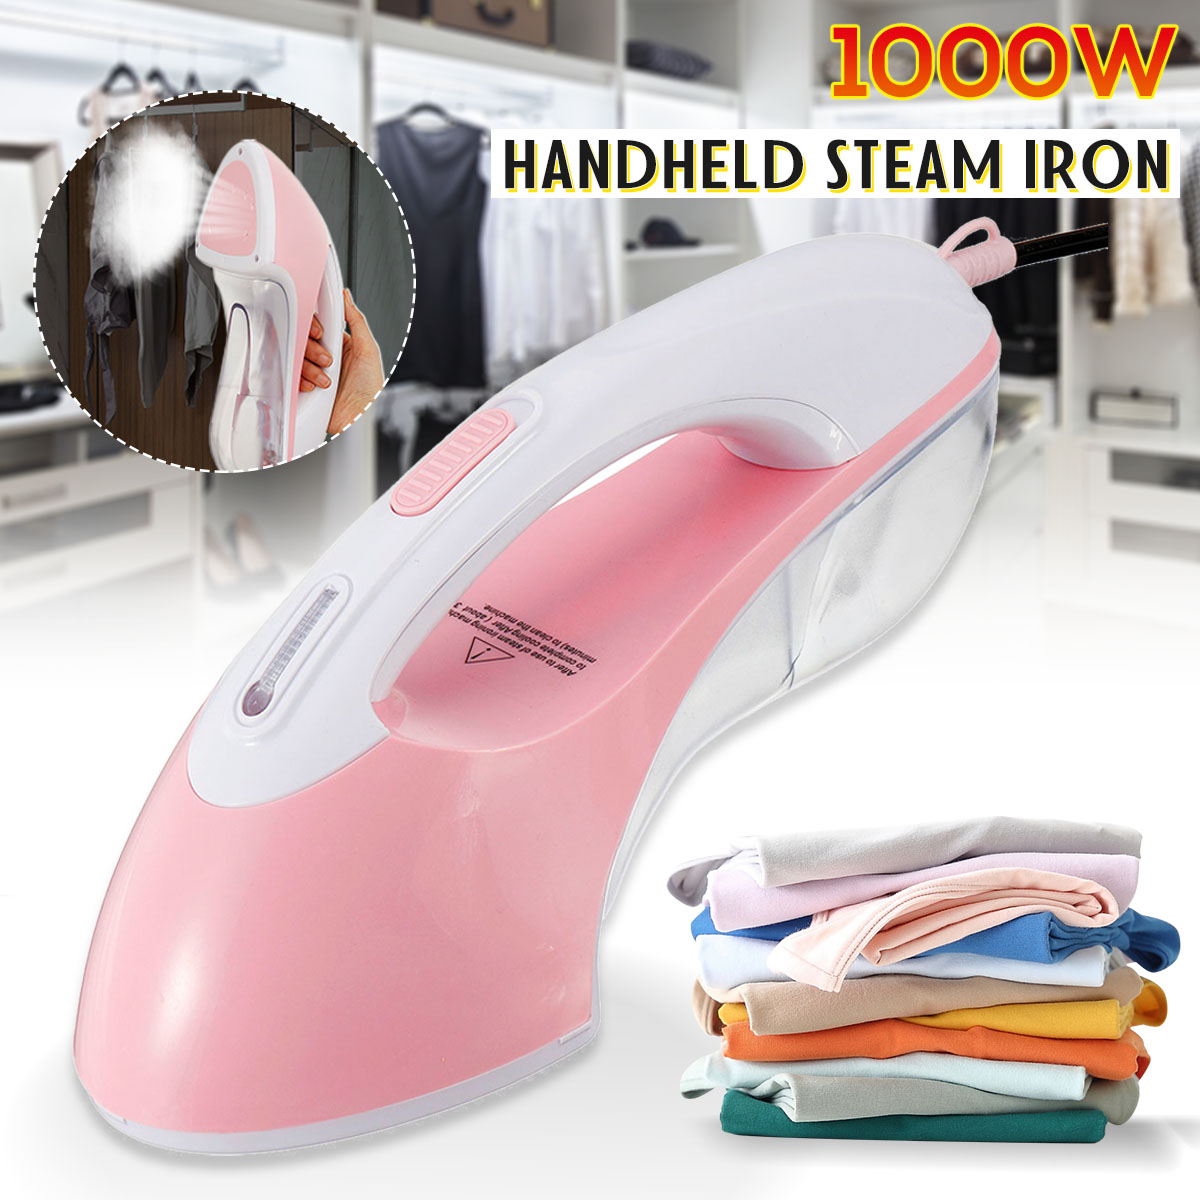 110V-1000W-Handheld-Electric-Steam-Iron-Fabric-Clothes-Garment-Steamer-Dry-Flat-1500430-1